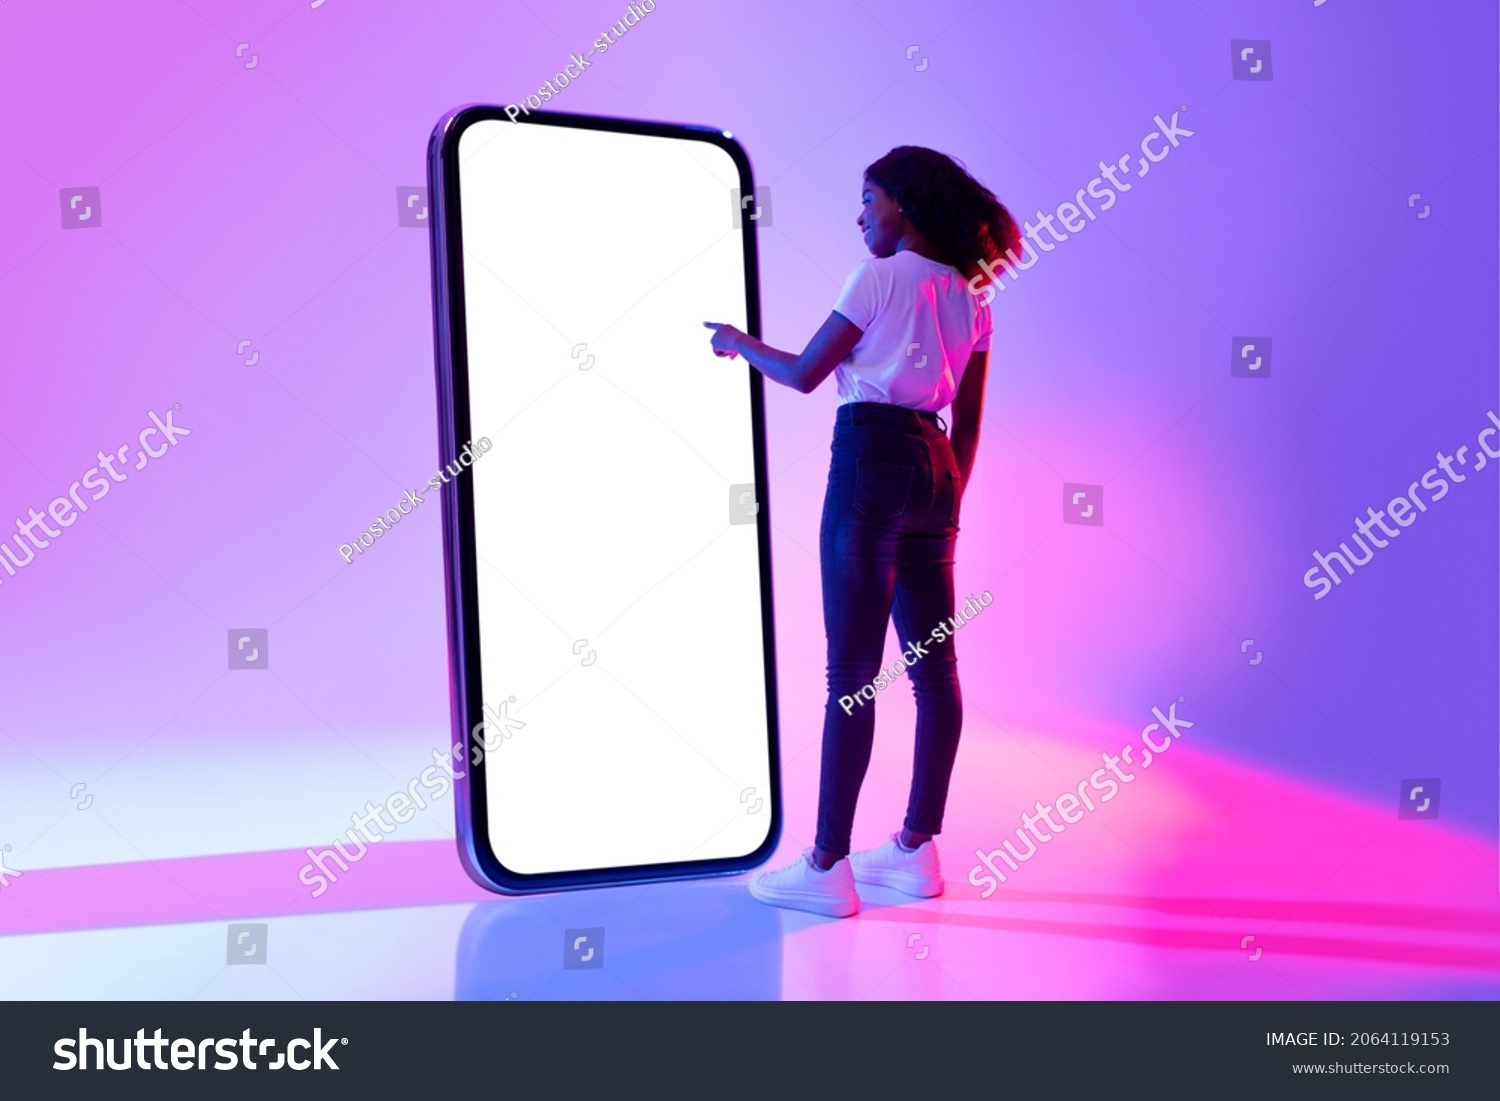 Full length of young black woman touching screen of giant smartphone in neon light, mockup for new mobile app or website design. African American lady interacting with big cellphone, space for ad #2064119153